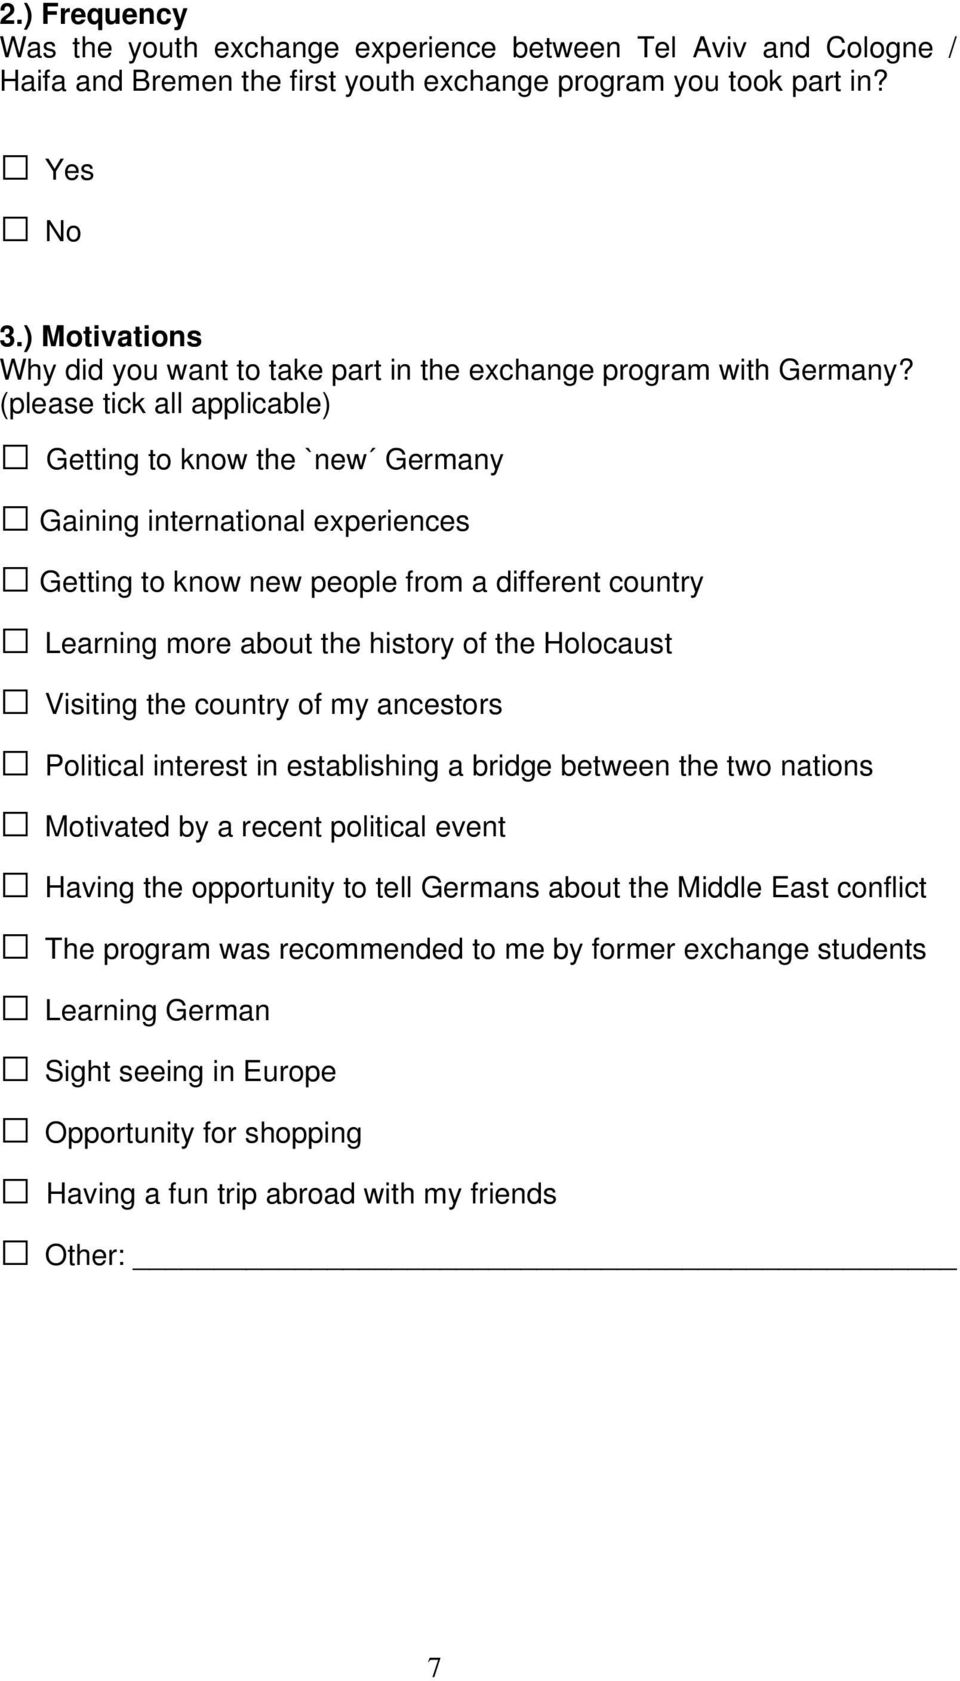 (please tick all applicable) Getting to know the `new Germany Gaining international experiences Getting to know new people from a different country Learning more about the history of the Holocaust